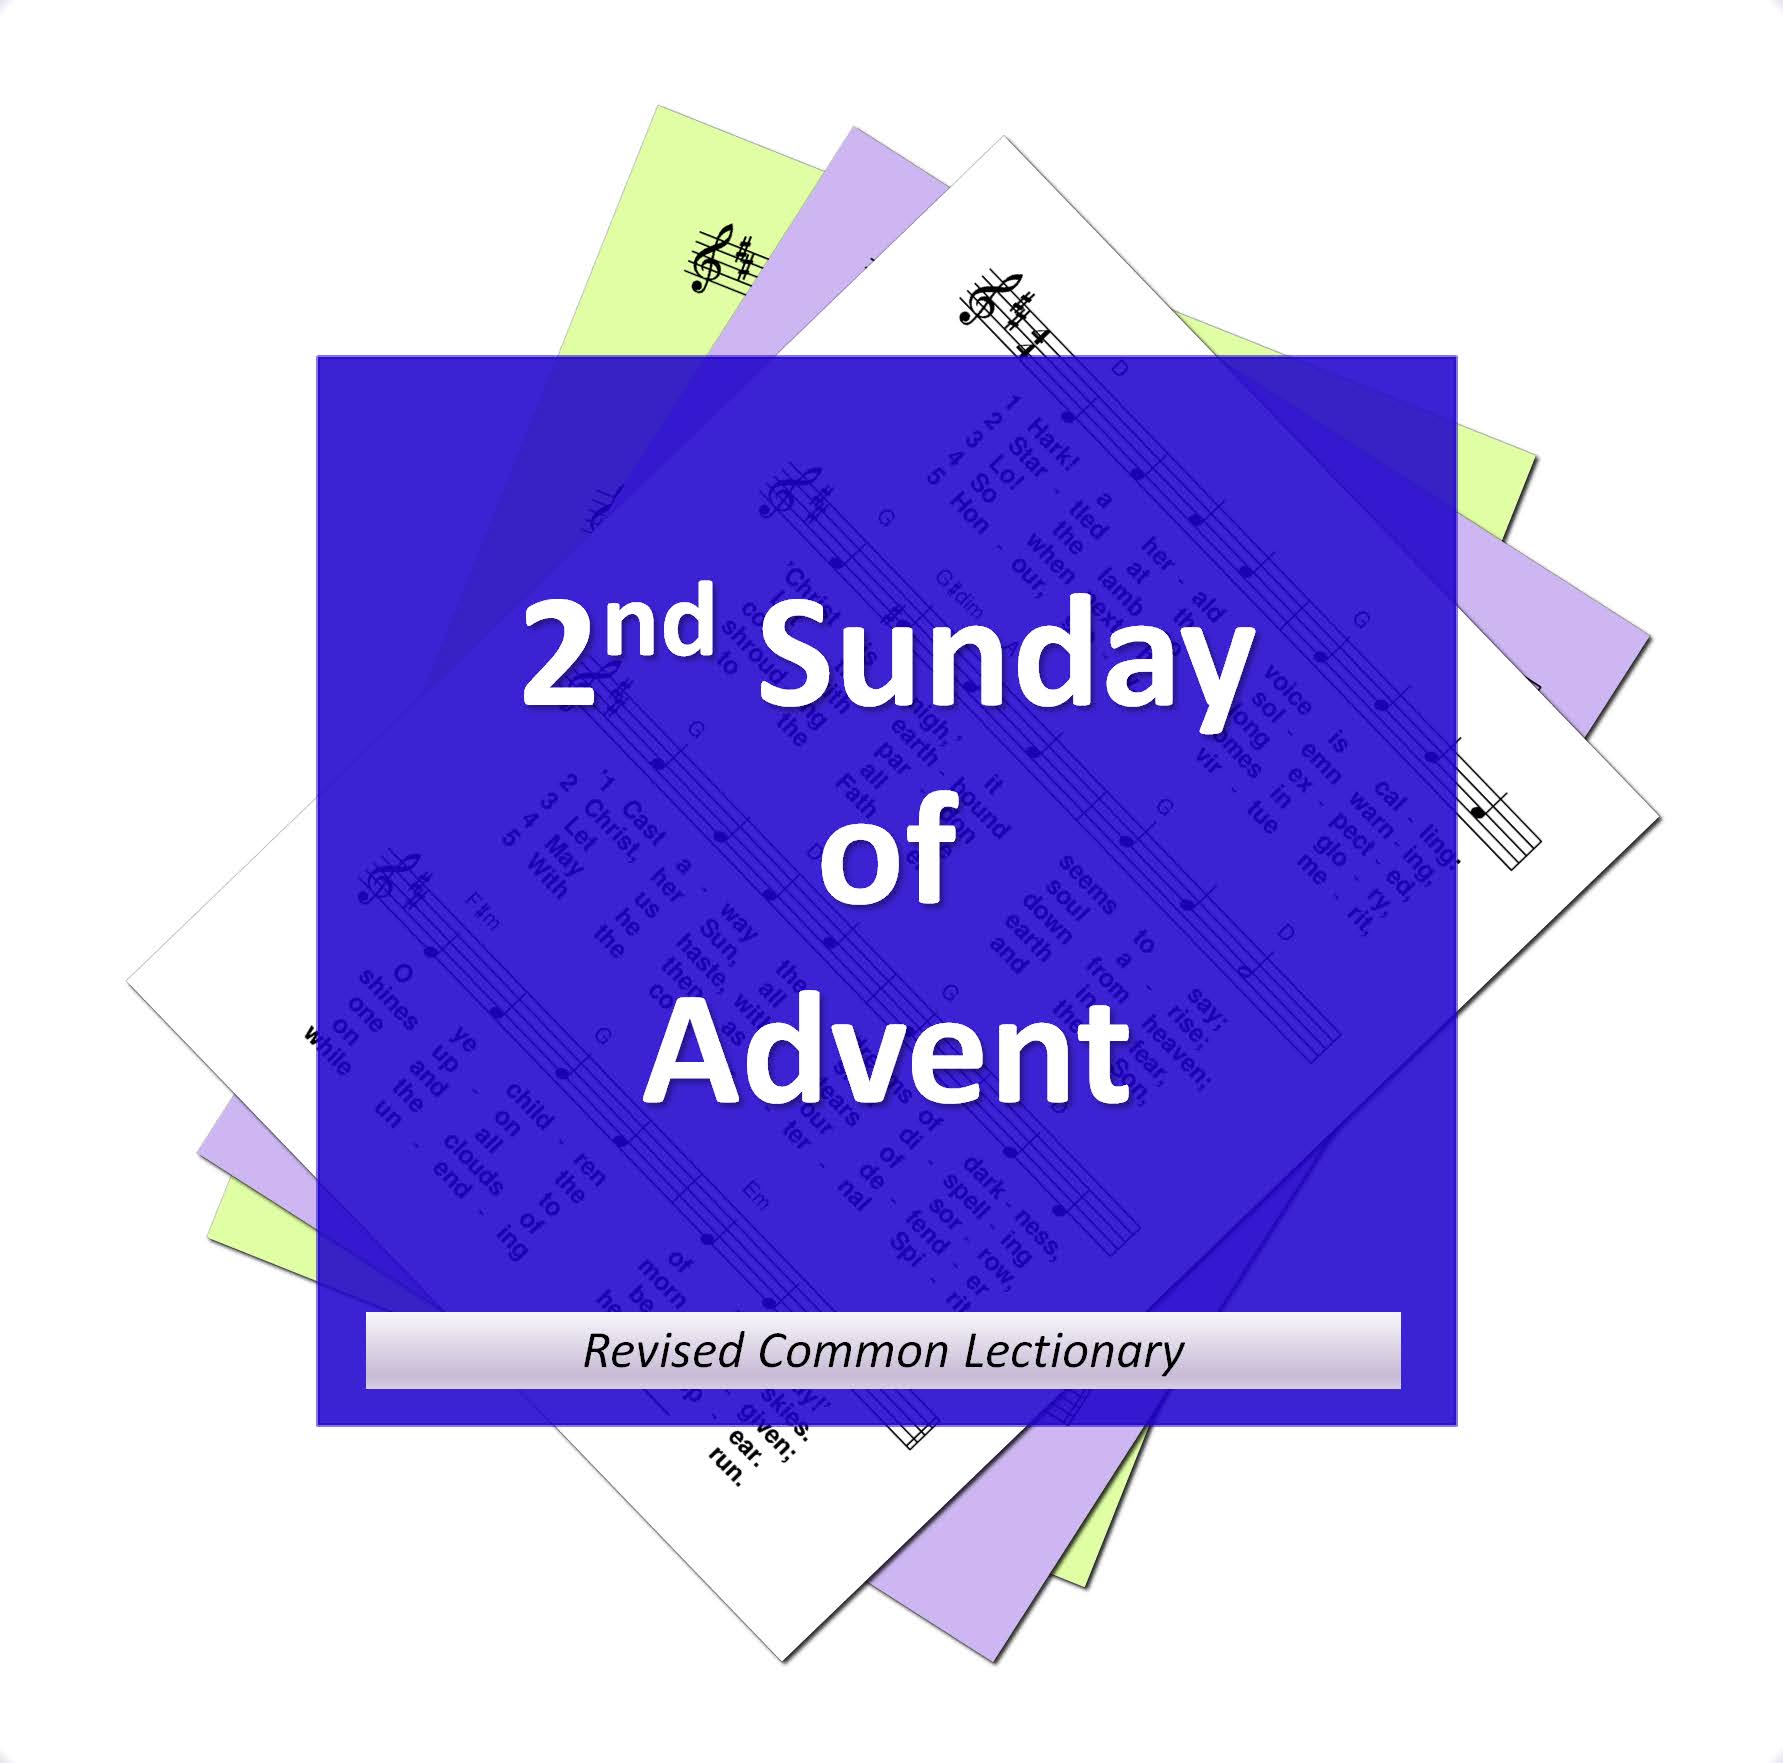 Hymns for the 2nd Sunday of Advent, Year A (4 Dec